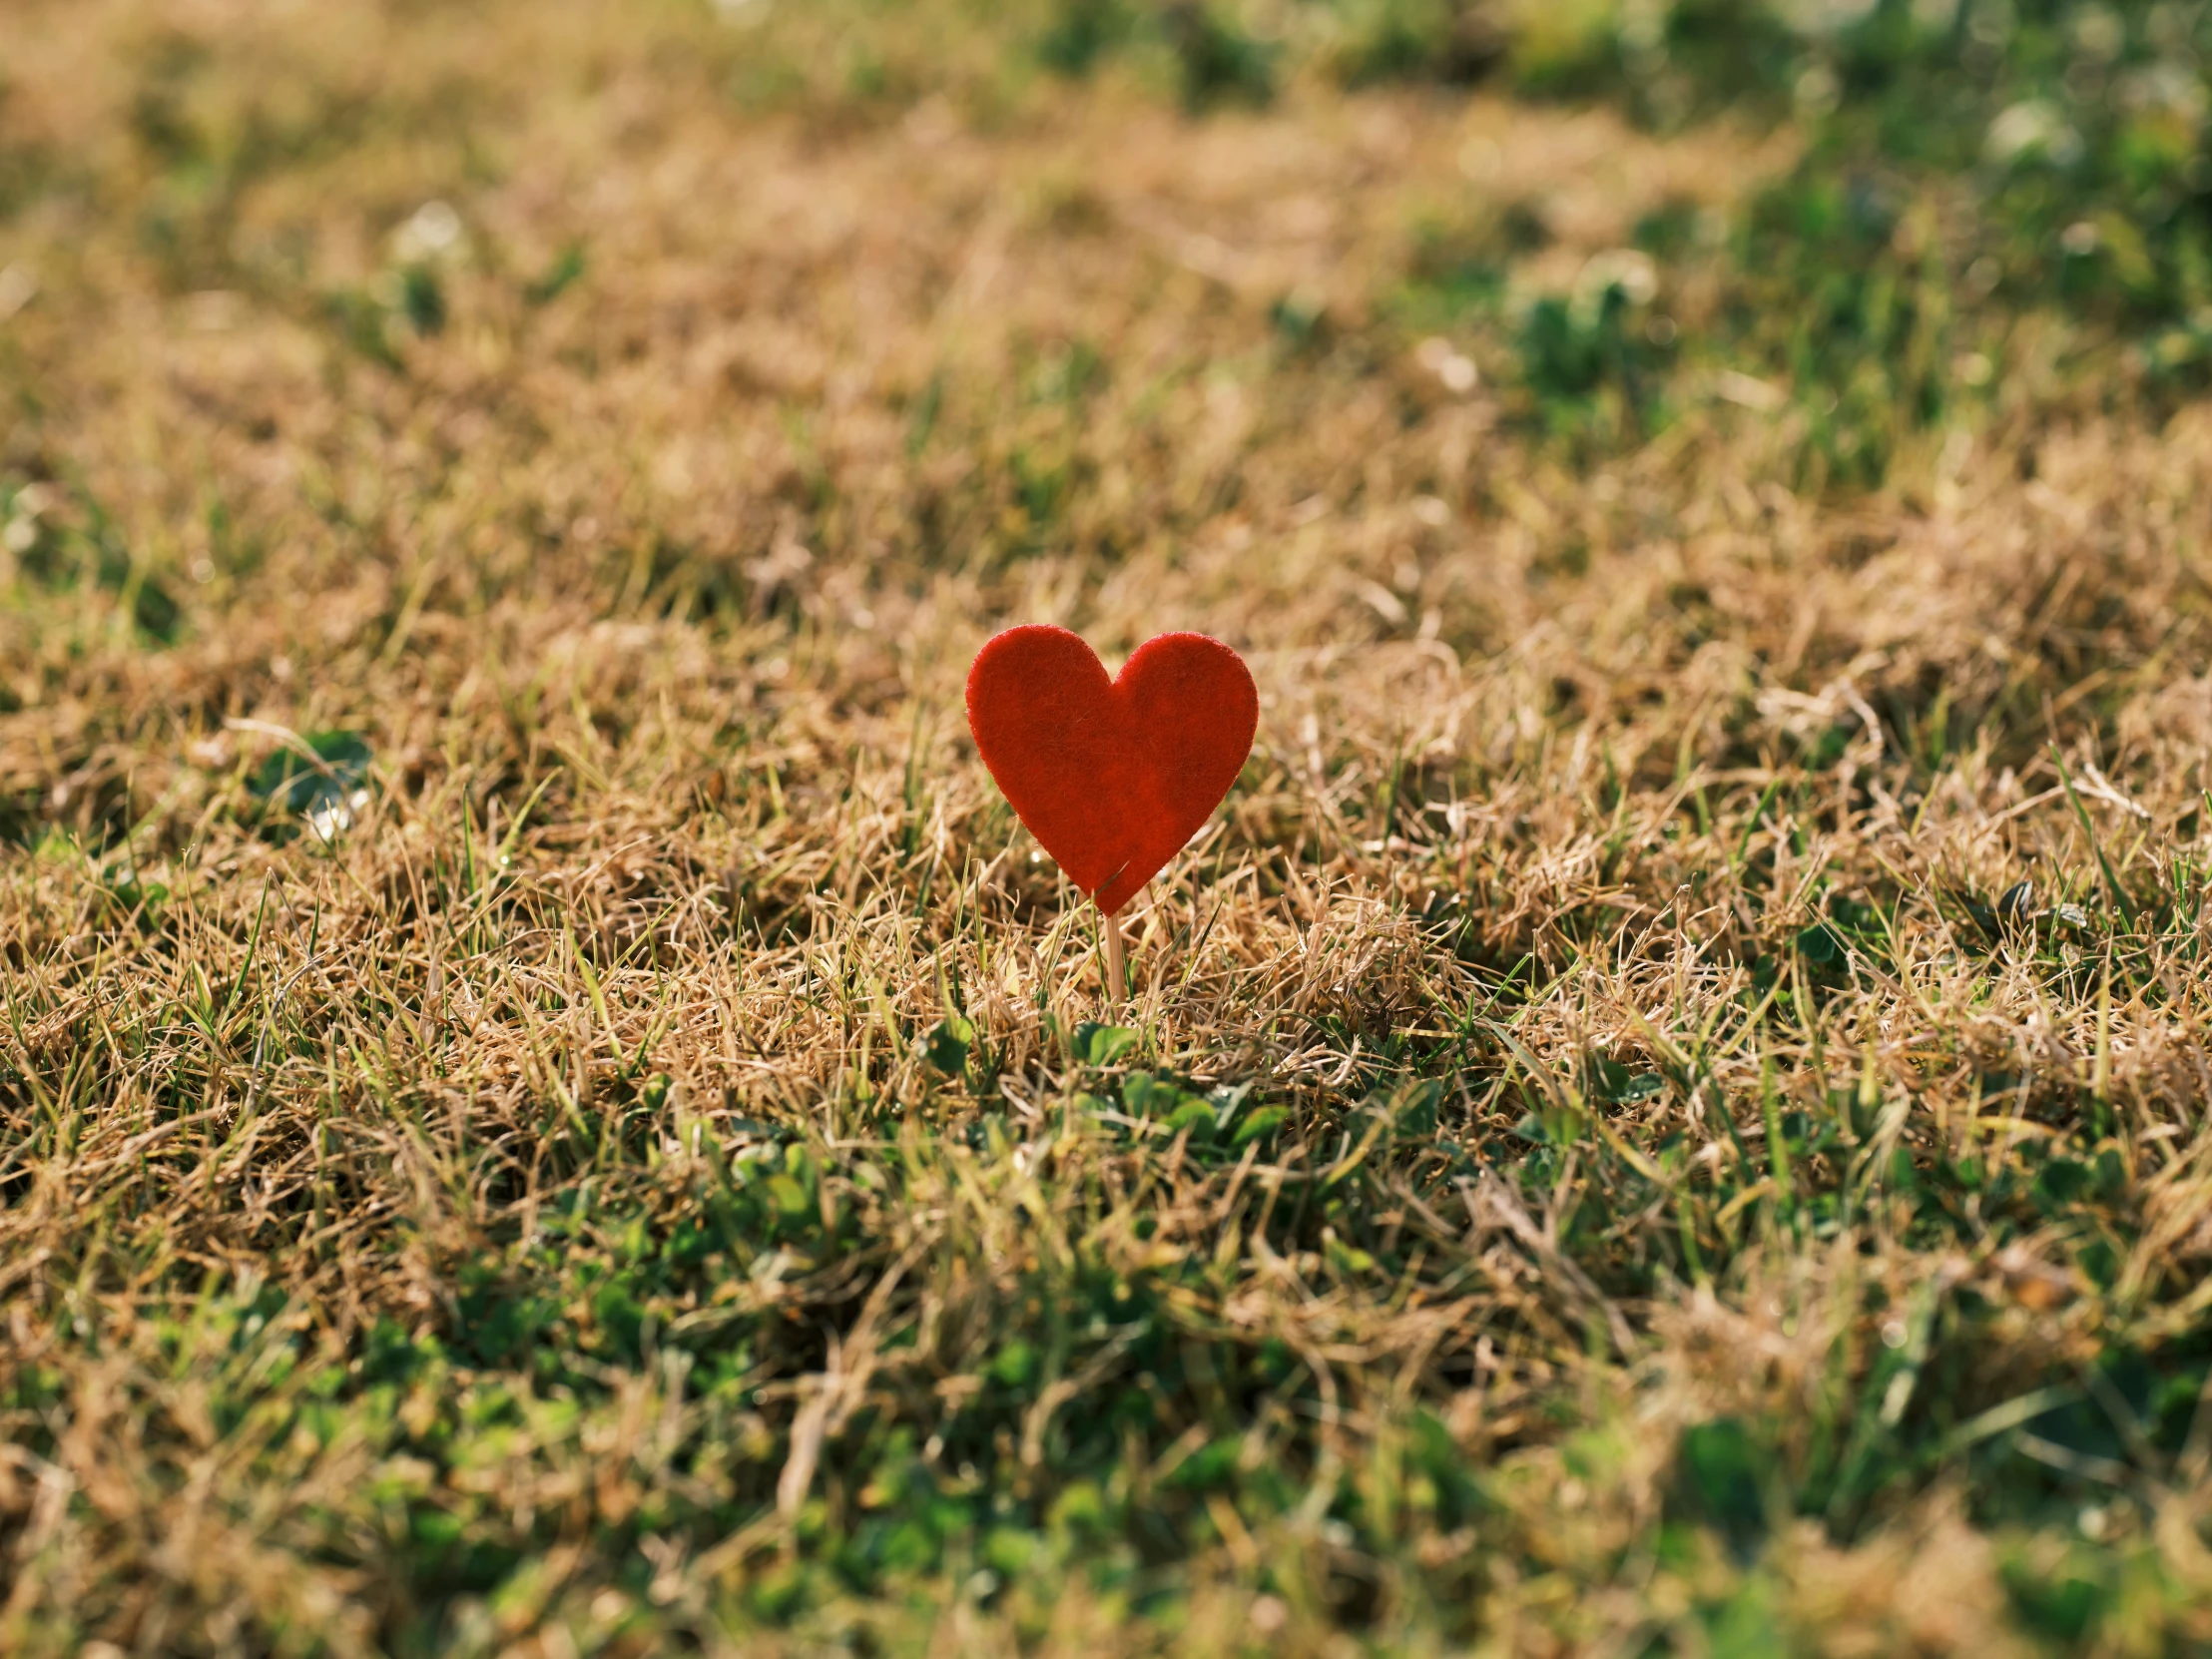 a red heart - shaped object sitting in the grass